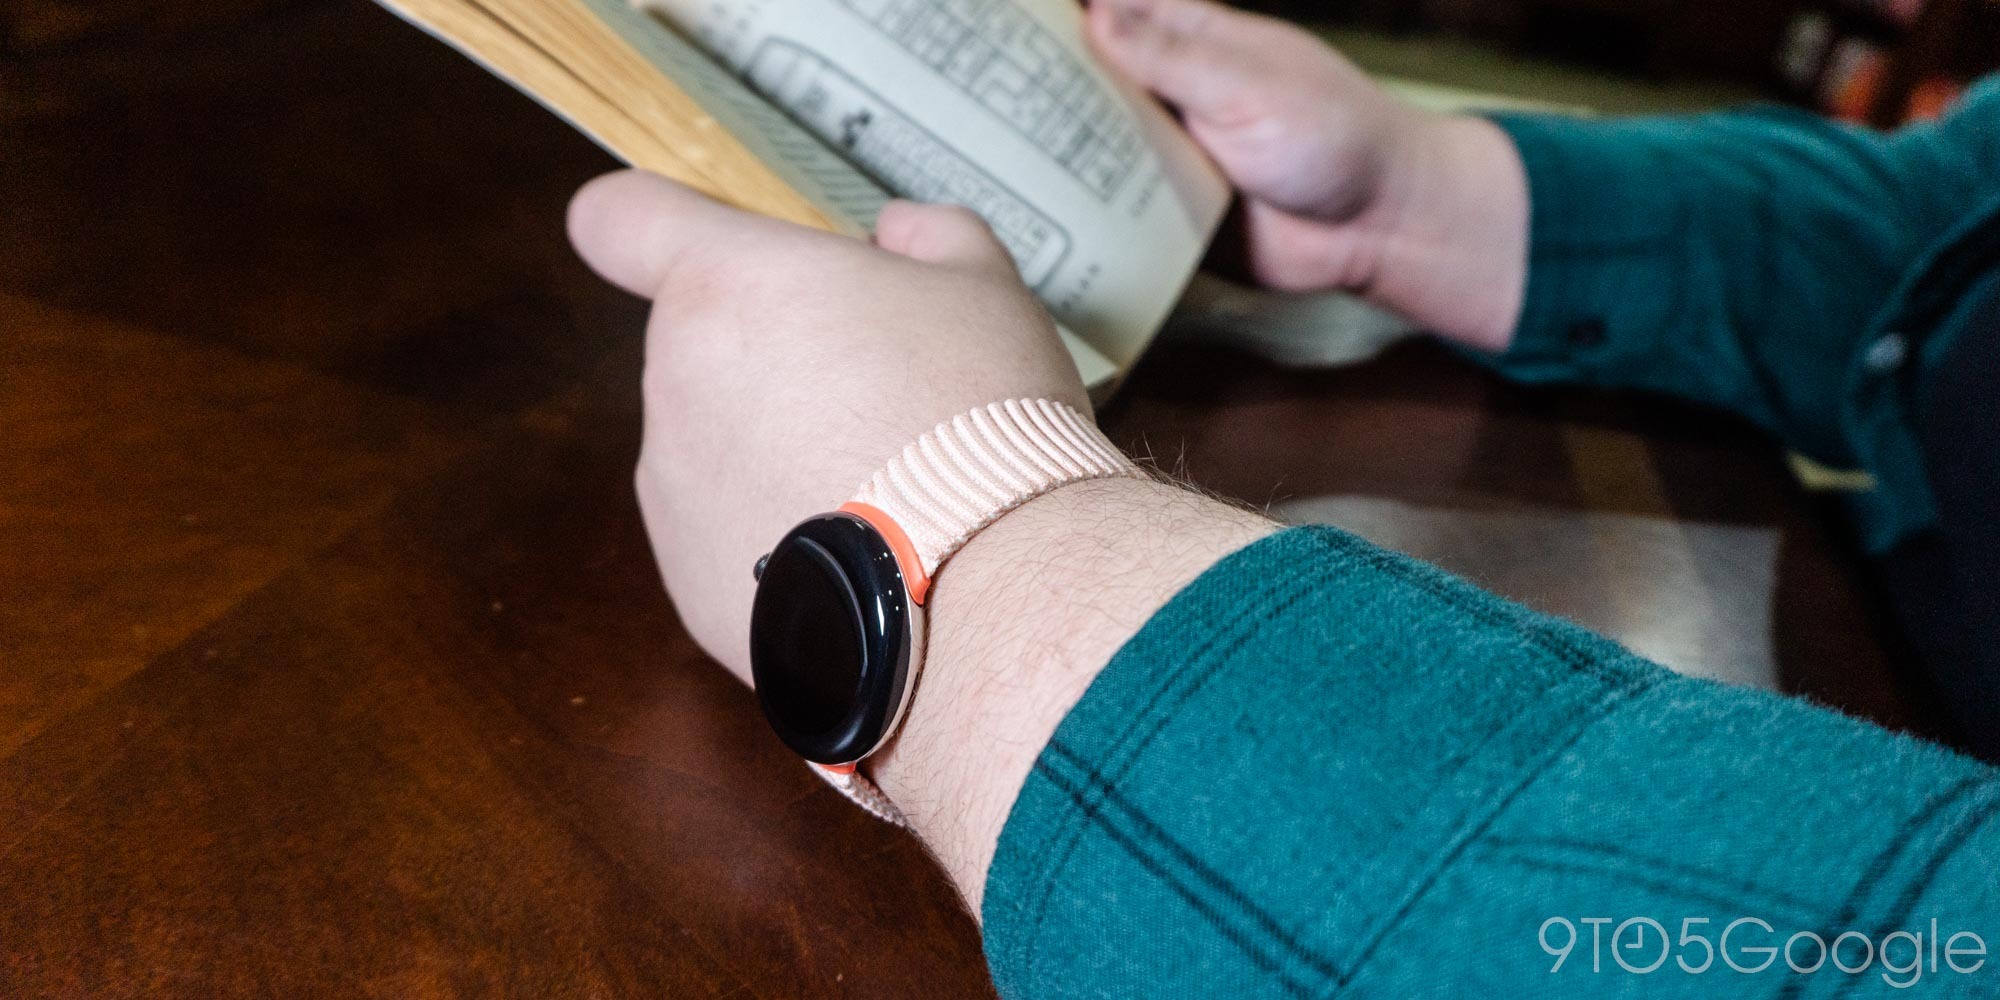 Review: Pixel Watch Stretch Band is soft like a warm, cozy sweater | Uhrenarmbänder